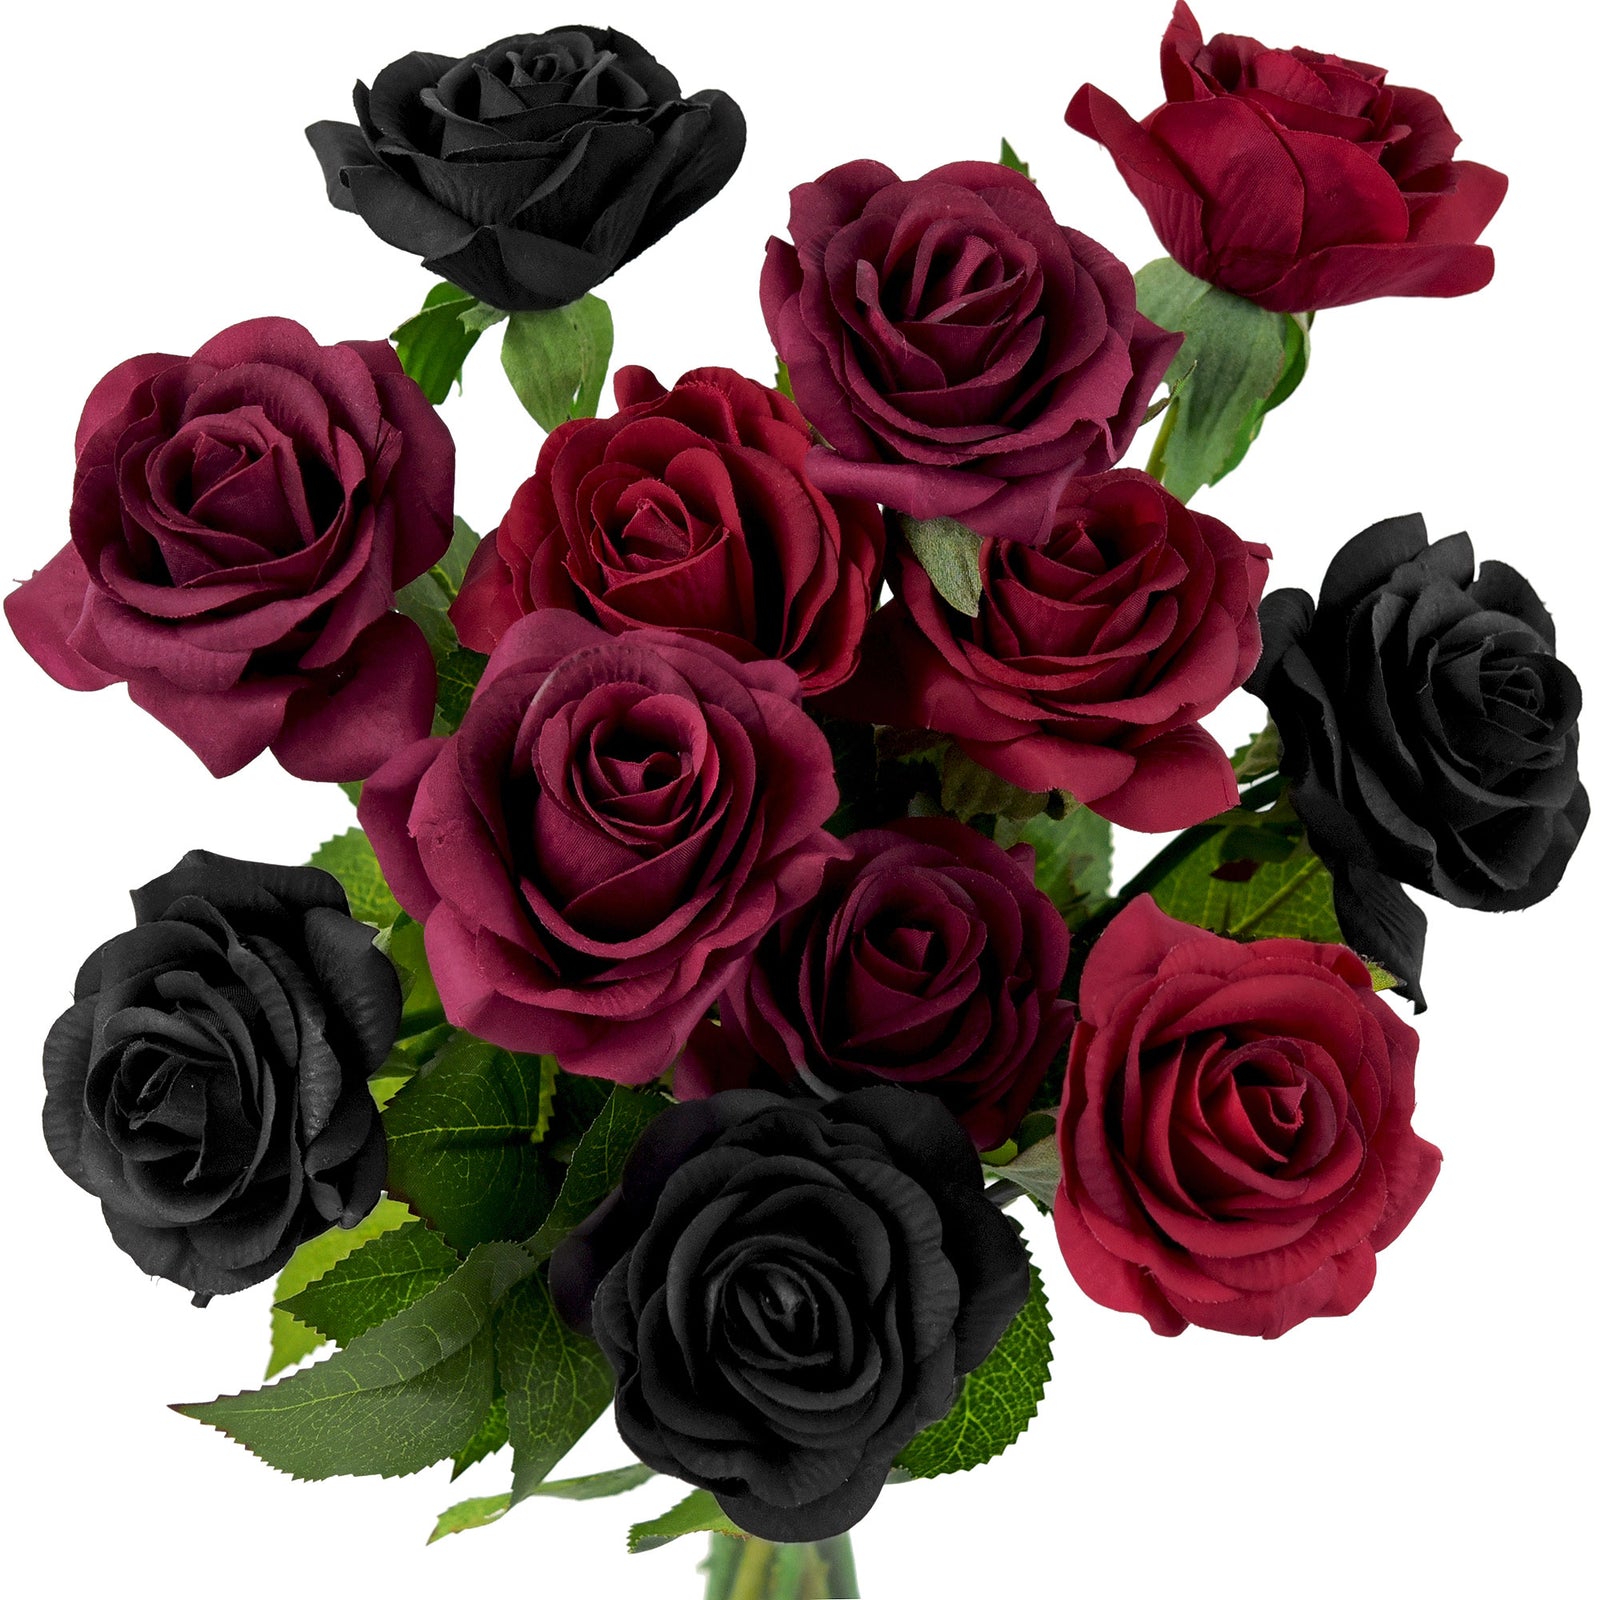 12 Stems of Red Roses with Fillers